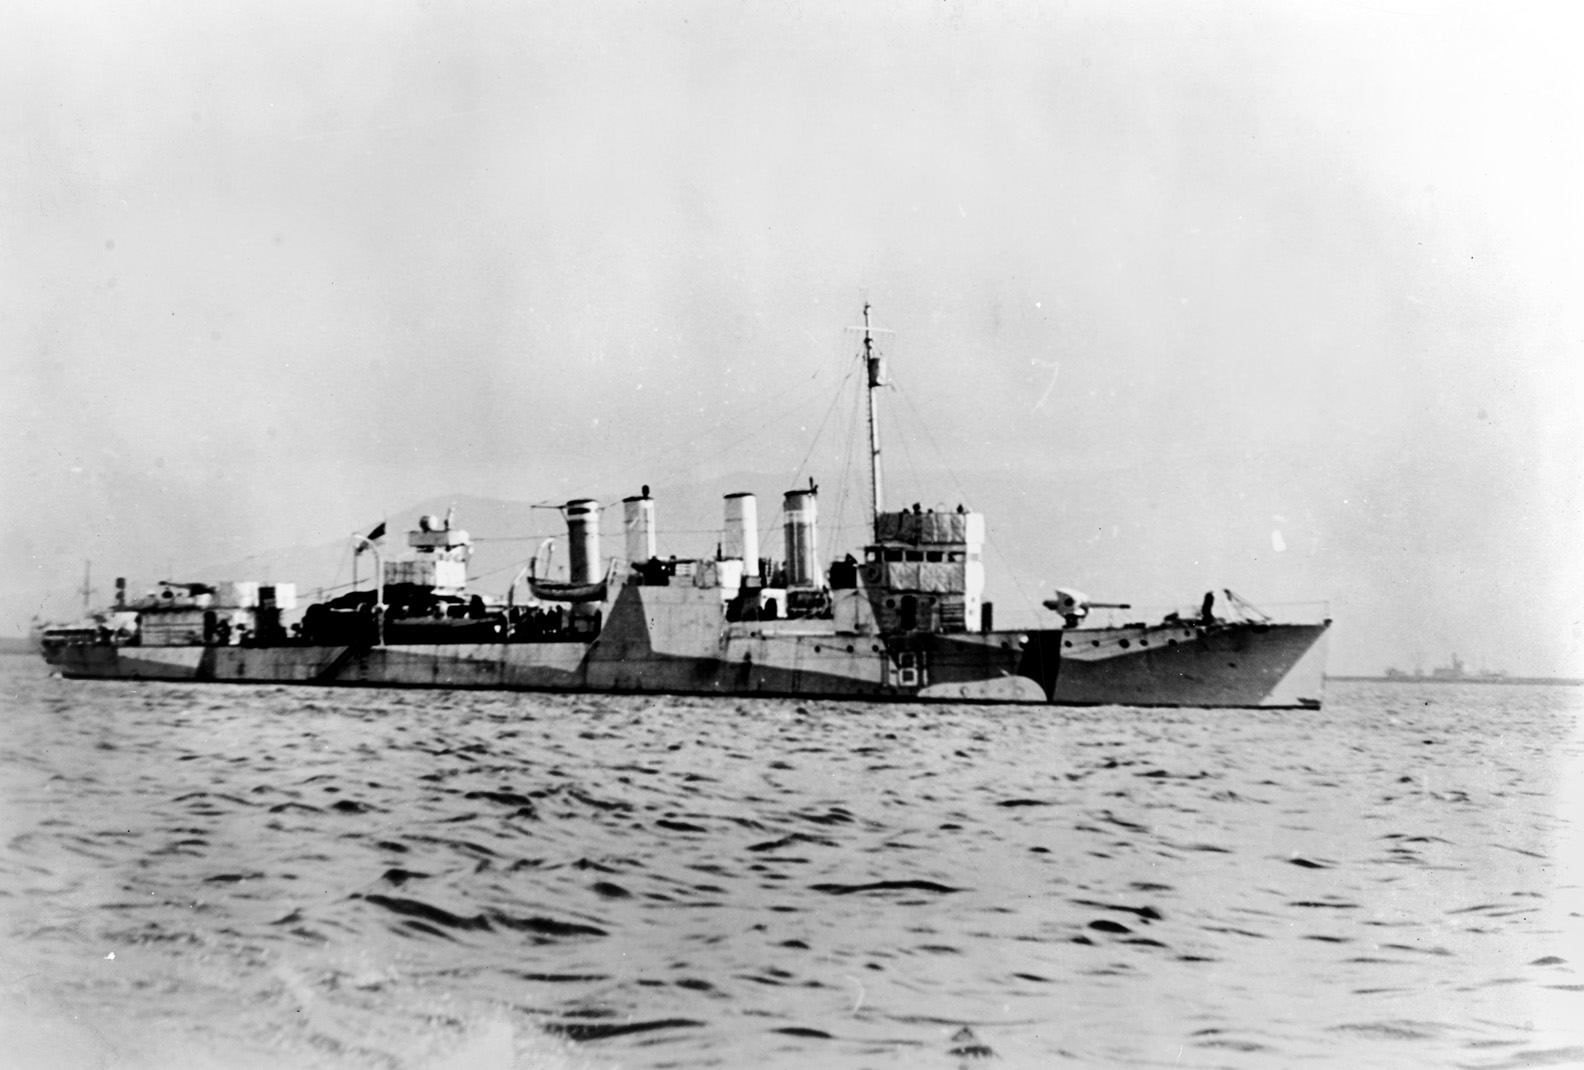 Formerly the USS McCook, the destroyer later known as HMS St. Croix served as a convoy escort in the Atlantic, sinking two German U-boats. However, St. Croix was later sunk by torpedoes fired from a U-boat.